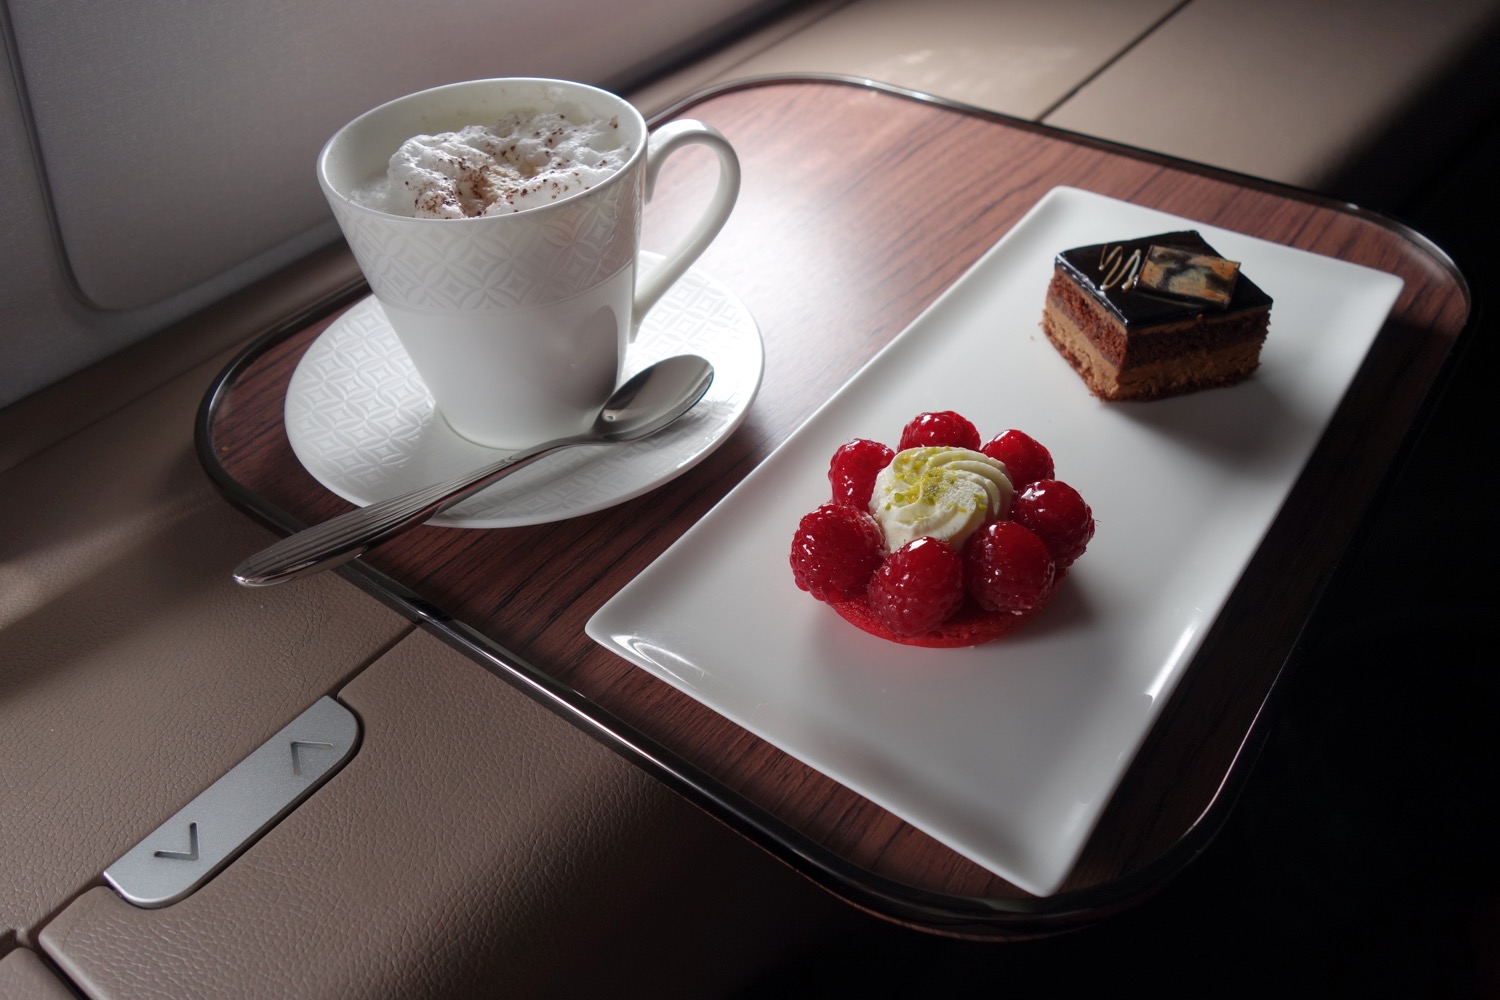 a cup of coffee and dessert on a tray